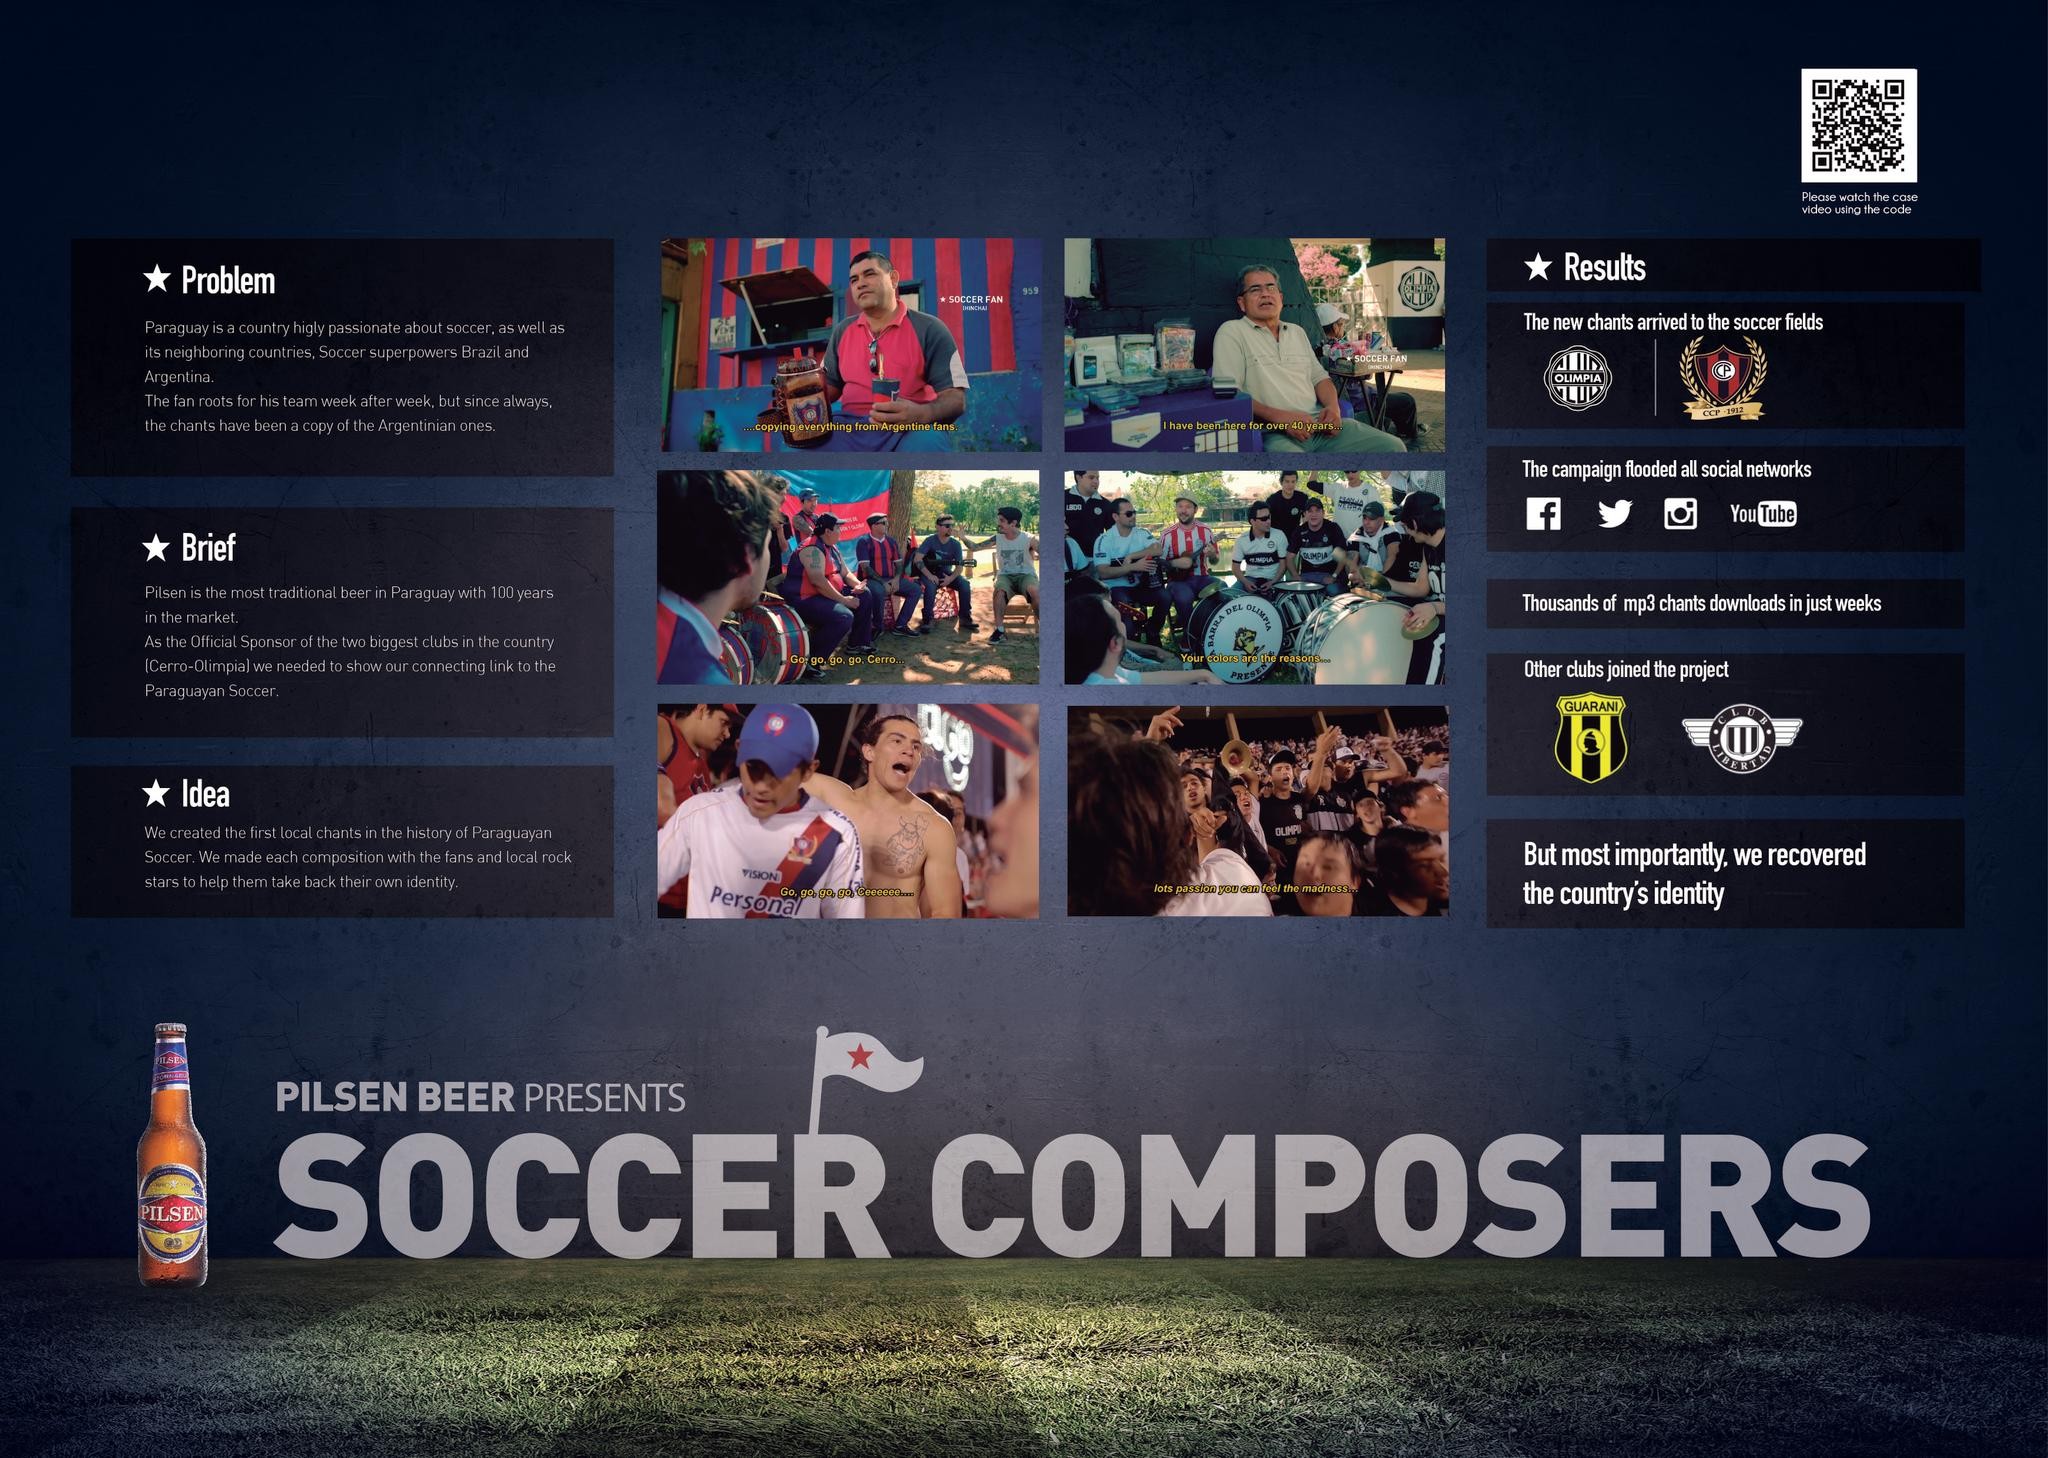 SOCCER COMPOSERS